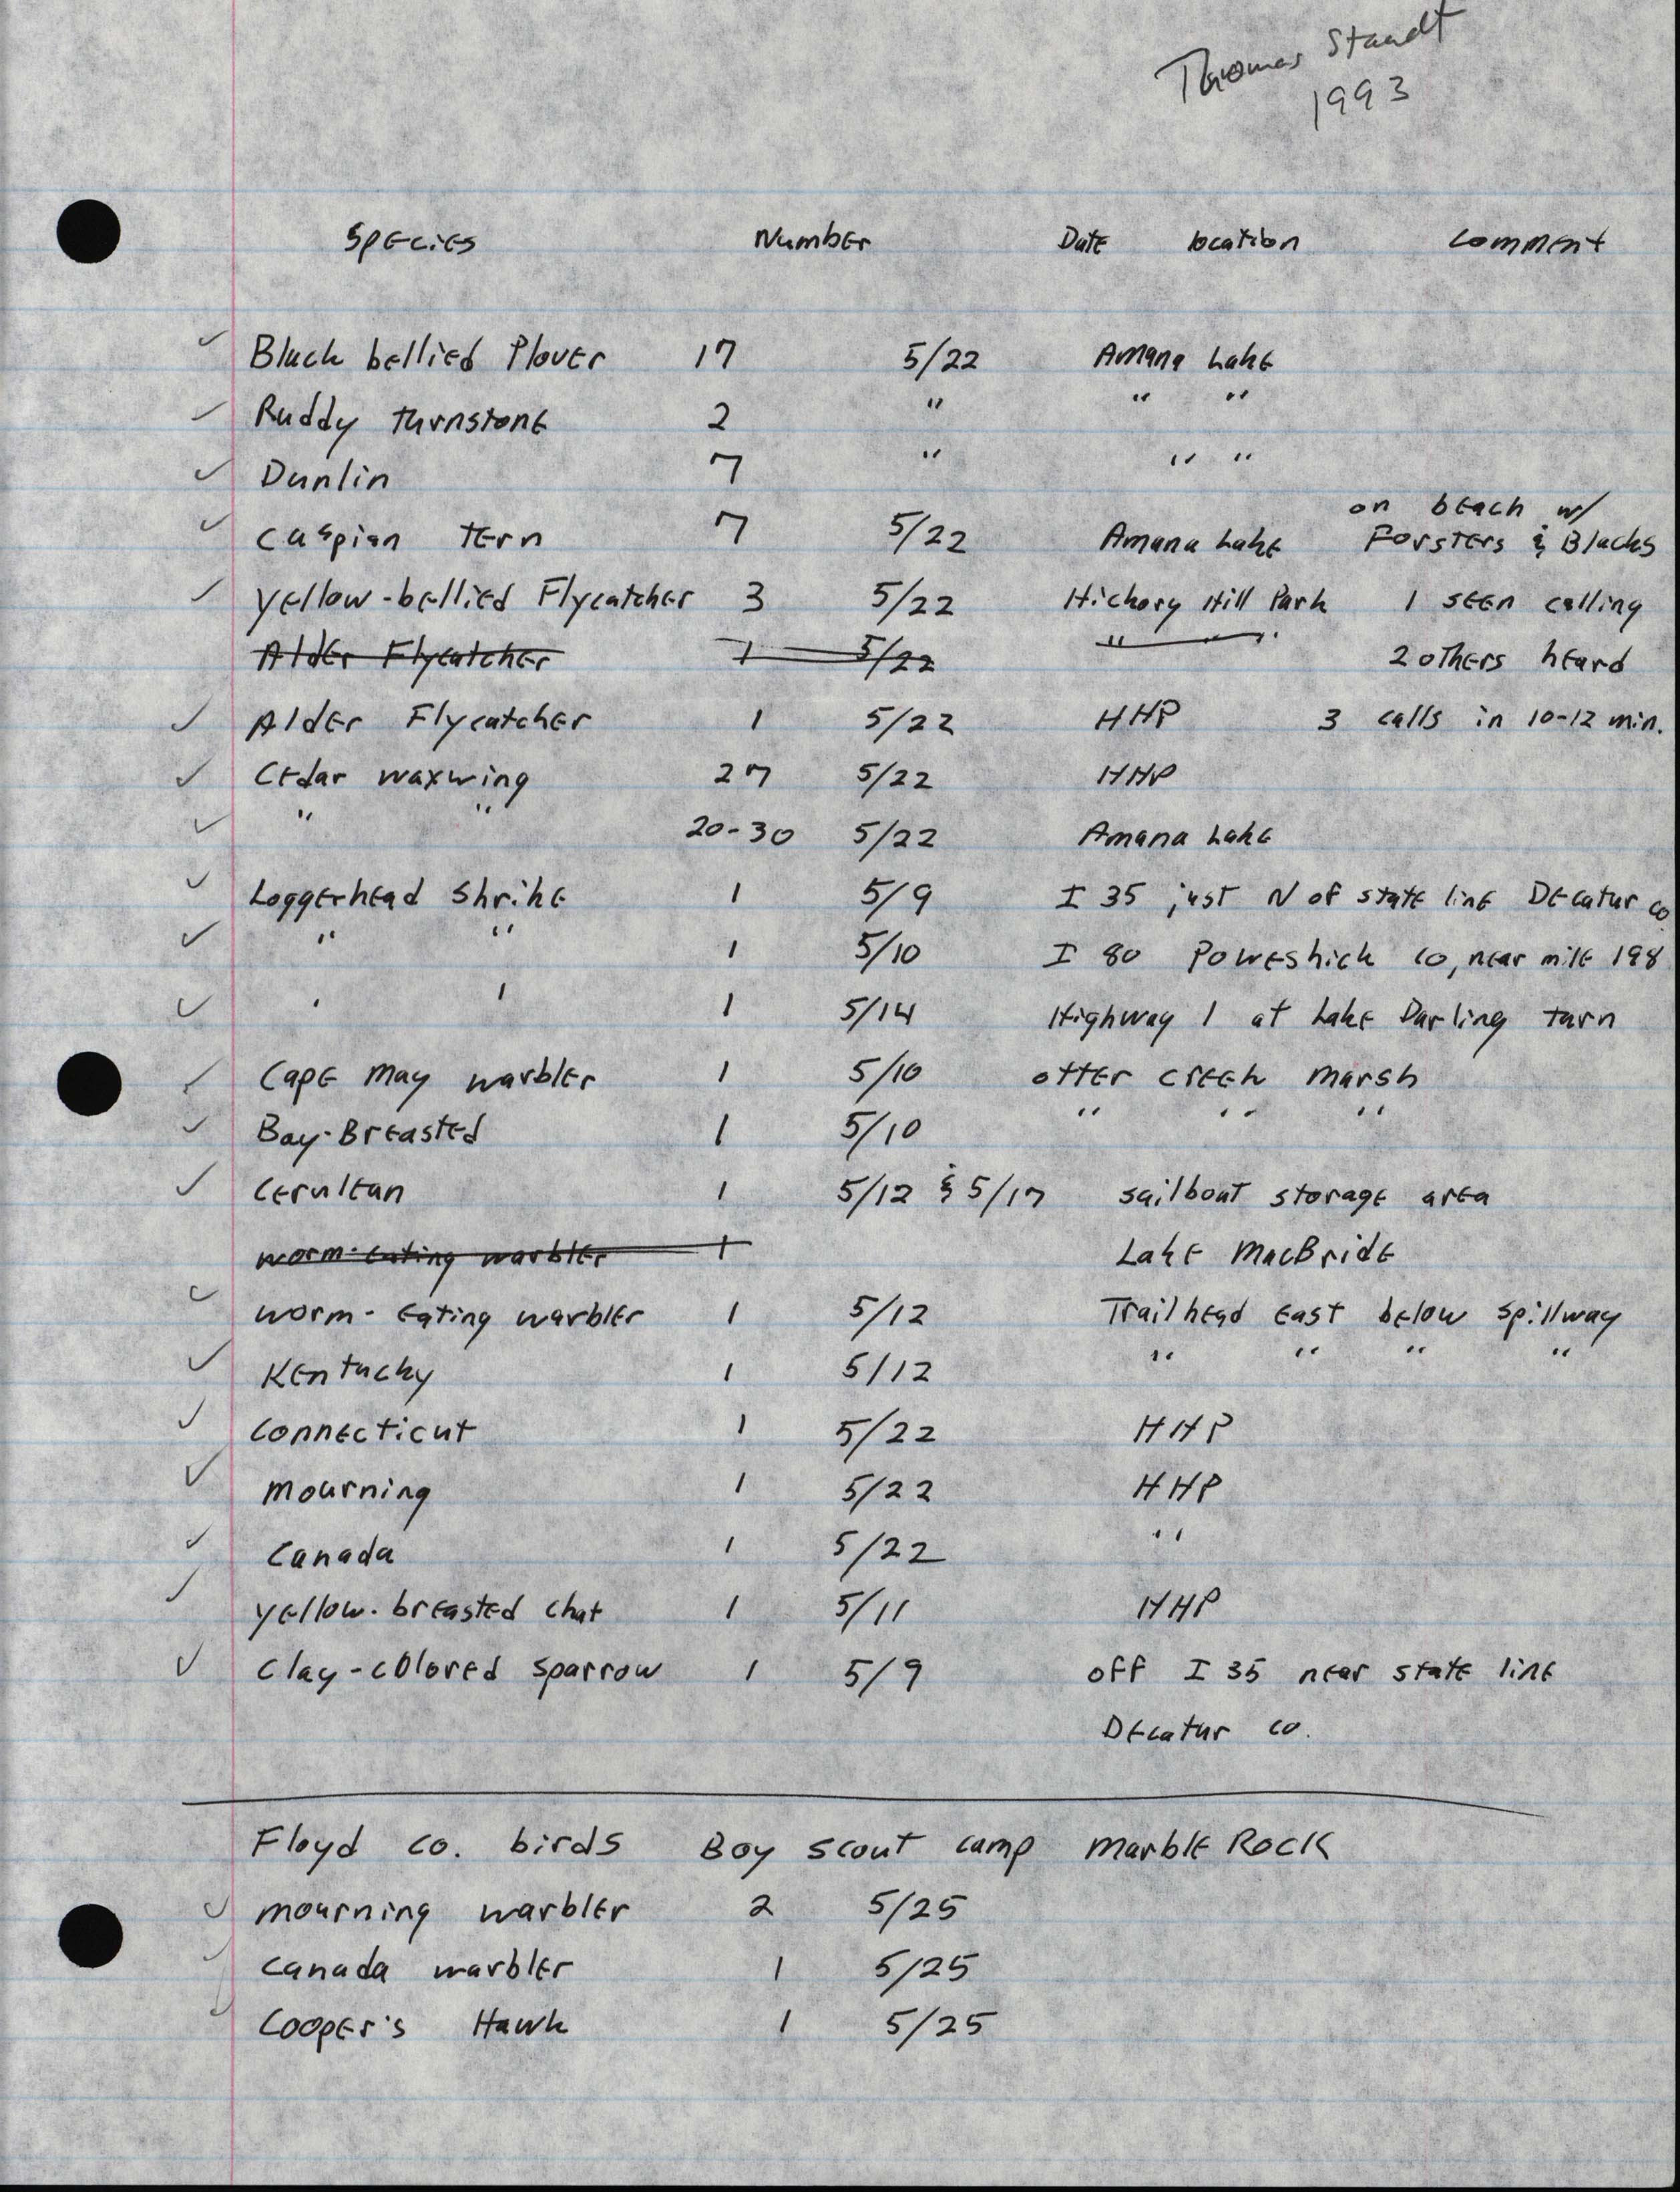 Annotated bird sighting list for Spring 1993 compiled by Thomas Staudt